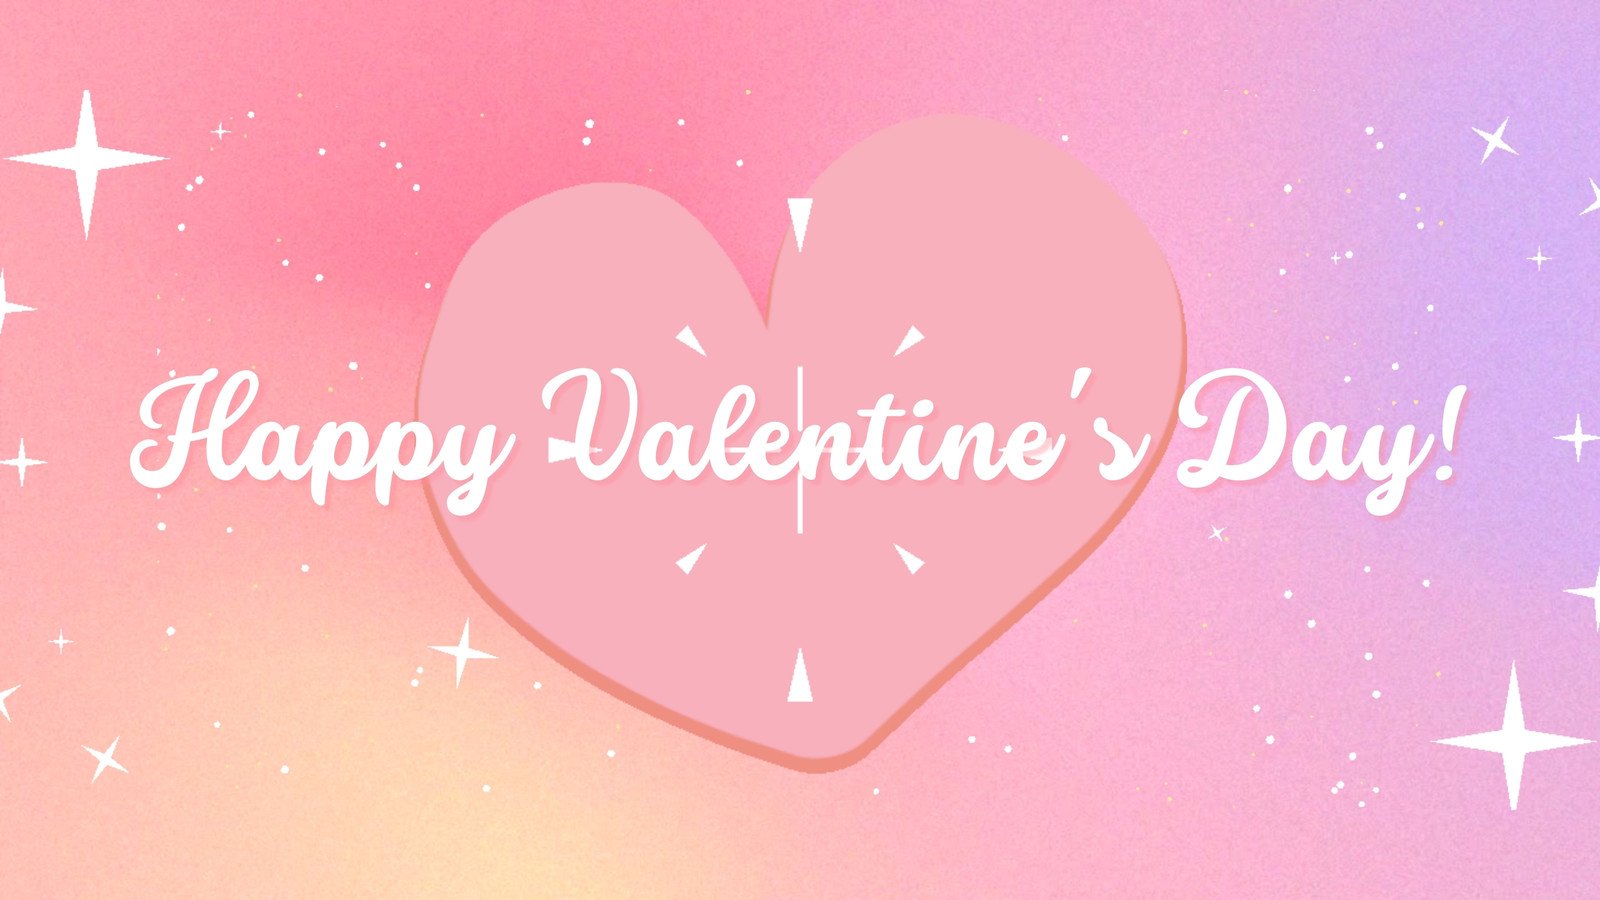 Free and customizable valentines day templates